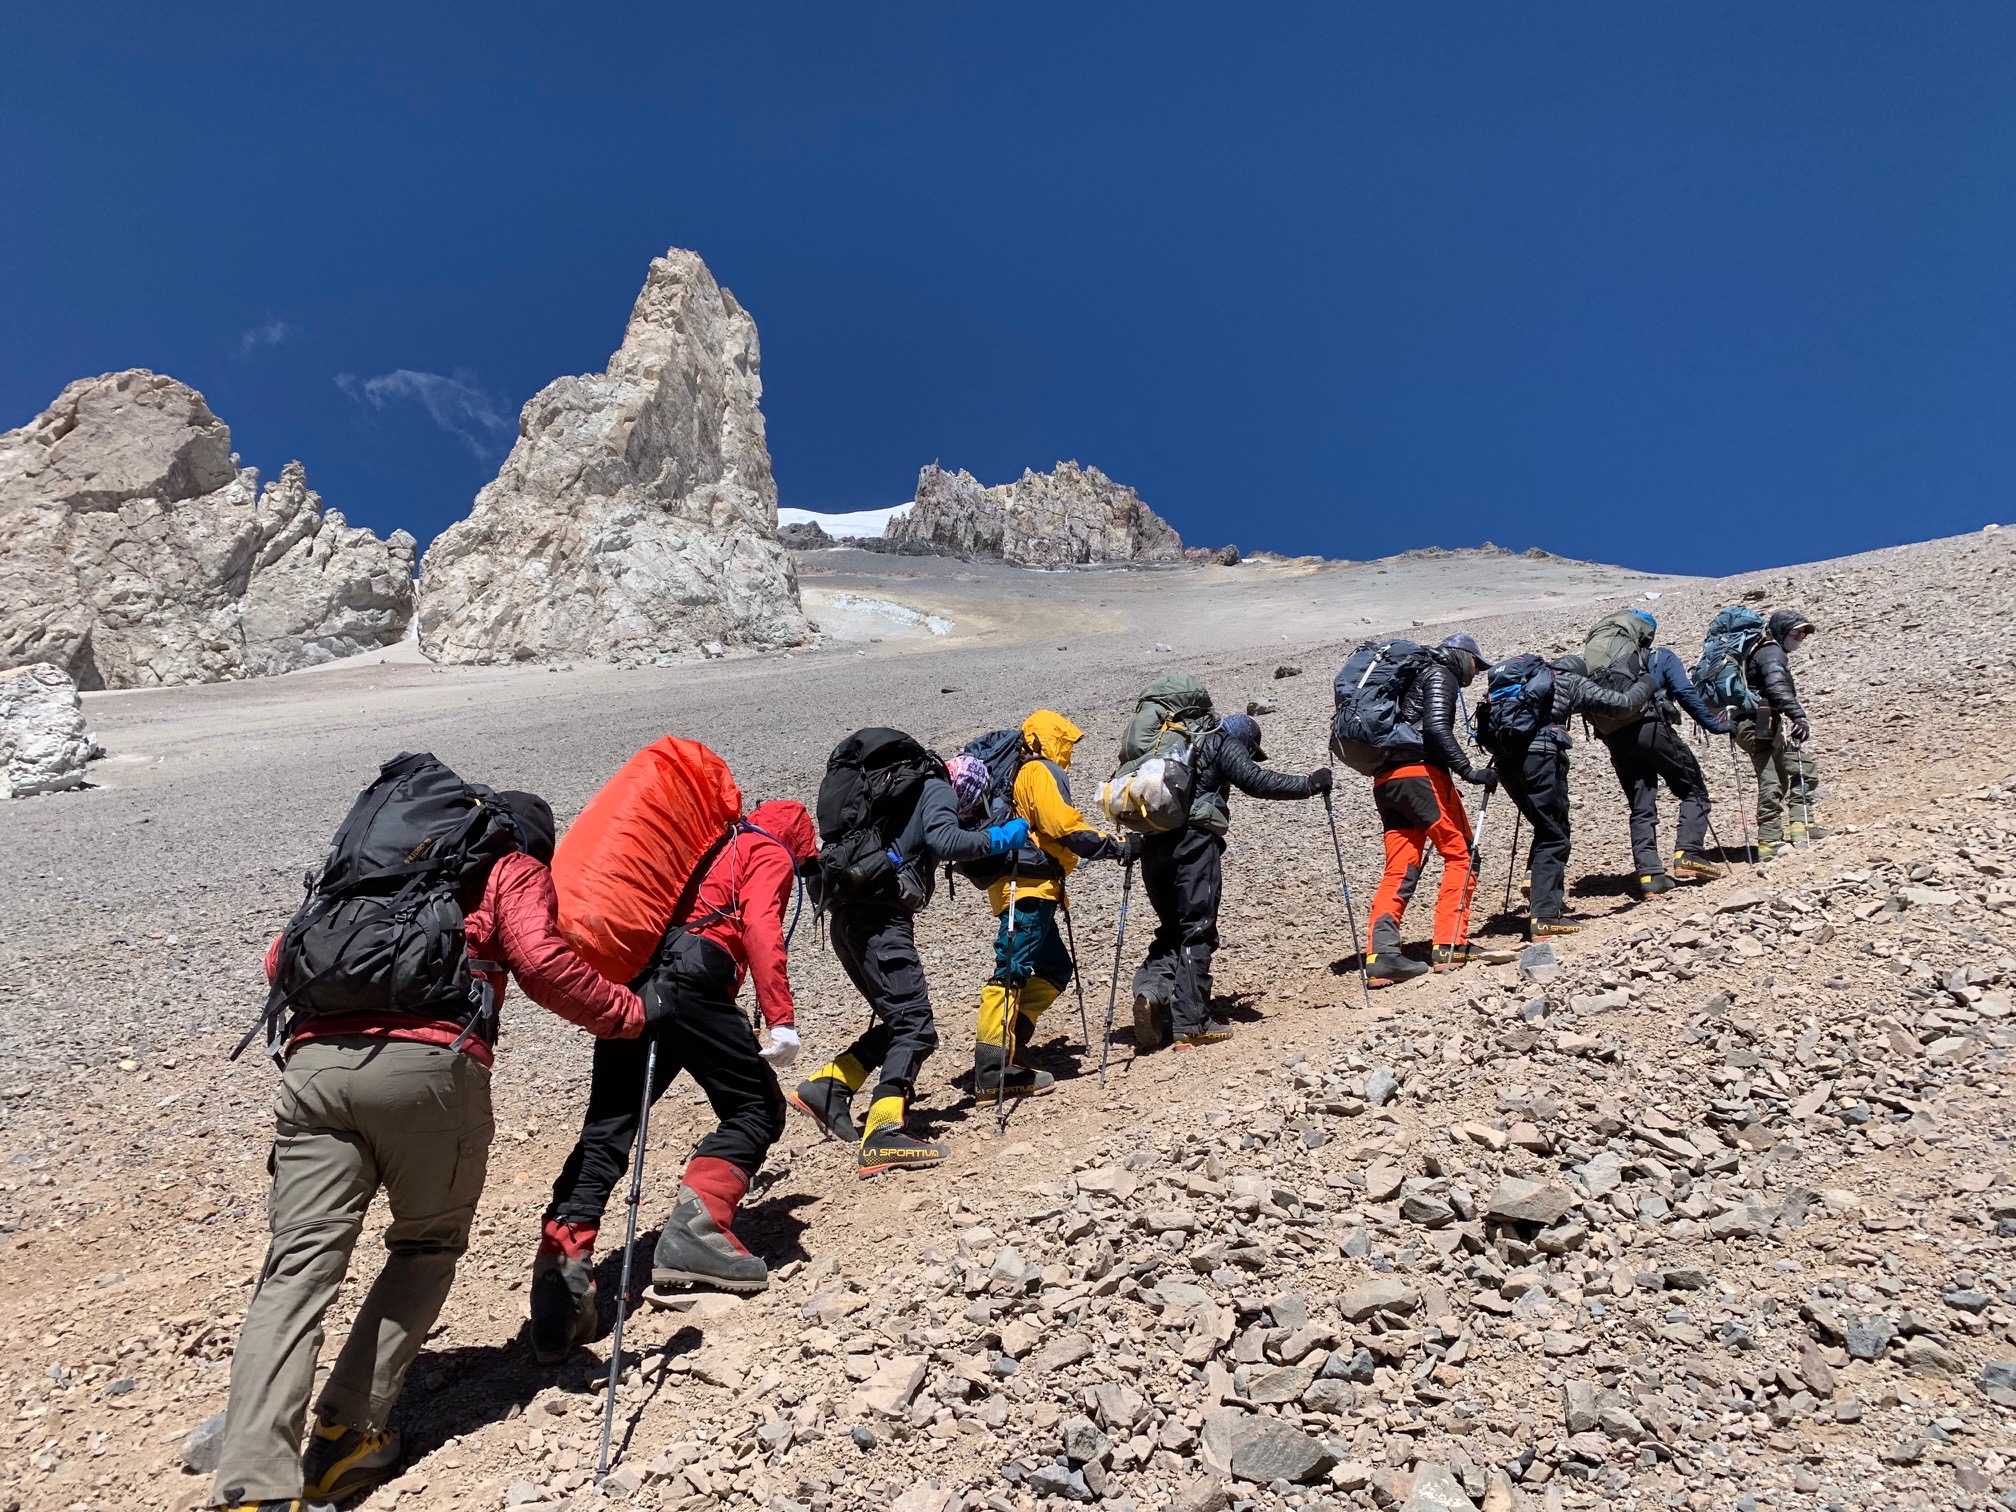 Hiking up to Camp 2 on Aconcagua